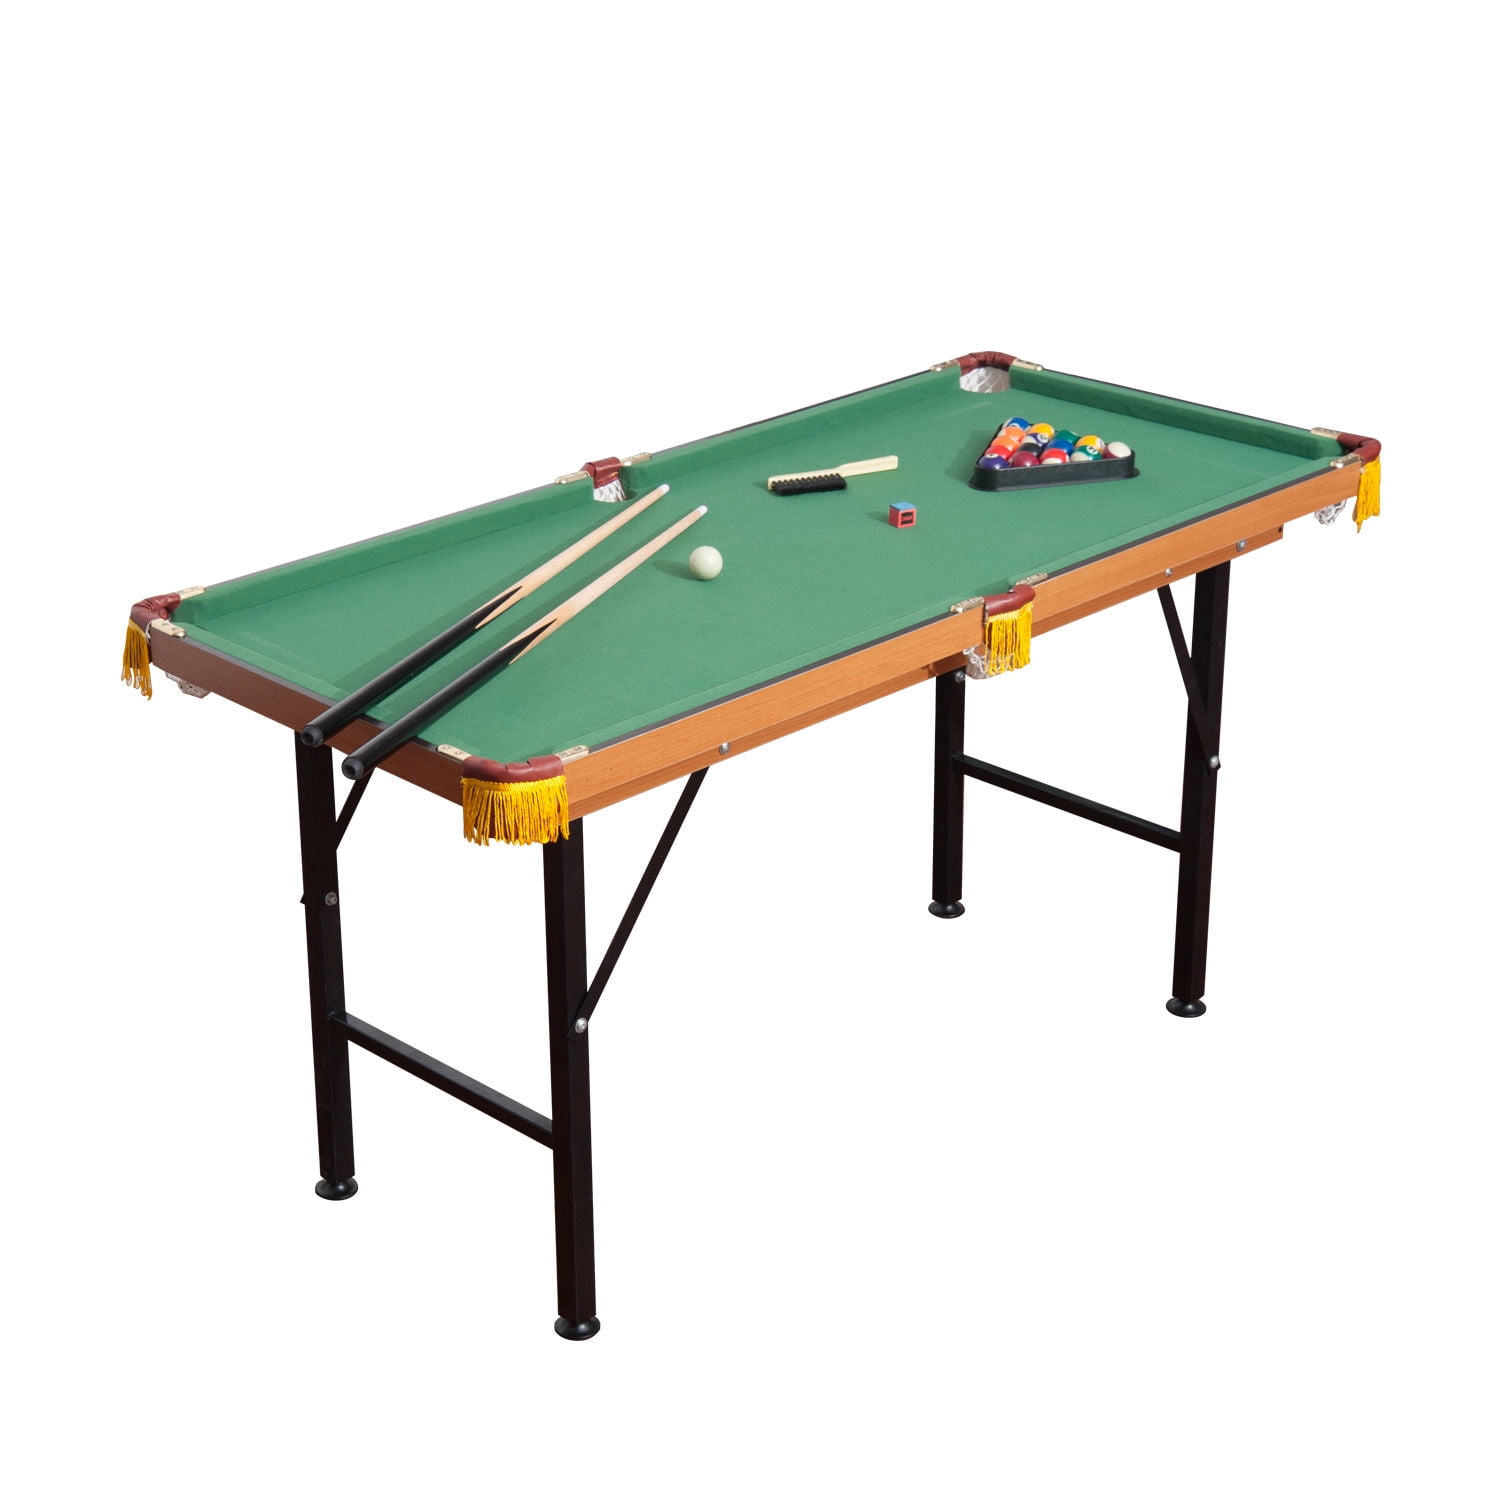 55 Portable Folding Billiards Table Game Pool Table For Kids Adults With Cues Ball Rack Brush Chalk Walmart Com Walmart Com,How To Arrange Artificial Flowers In A Mason Jar